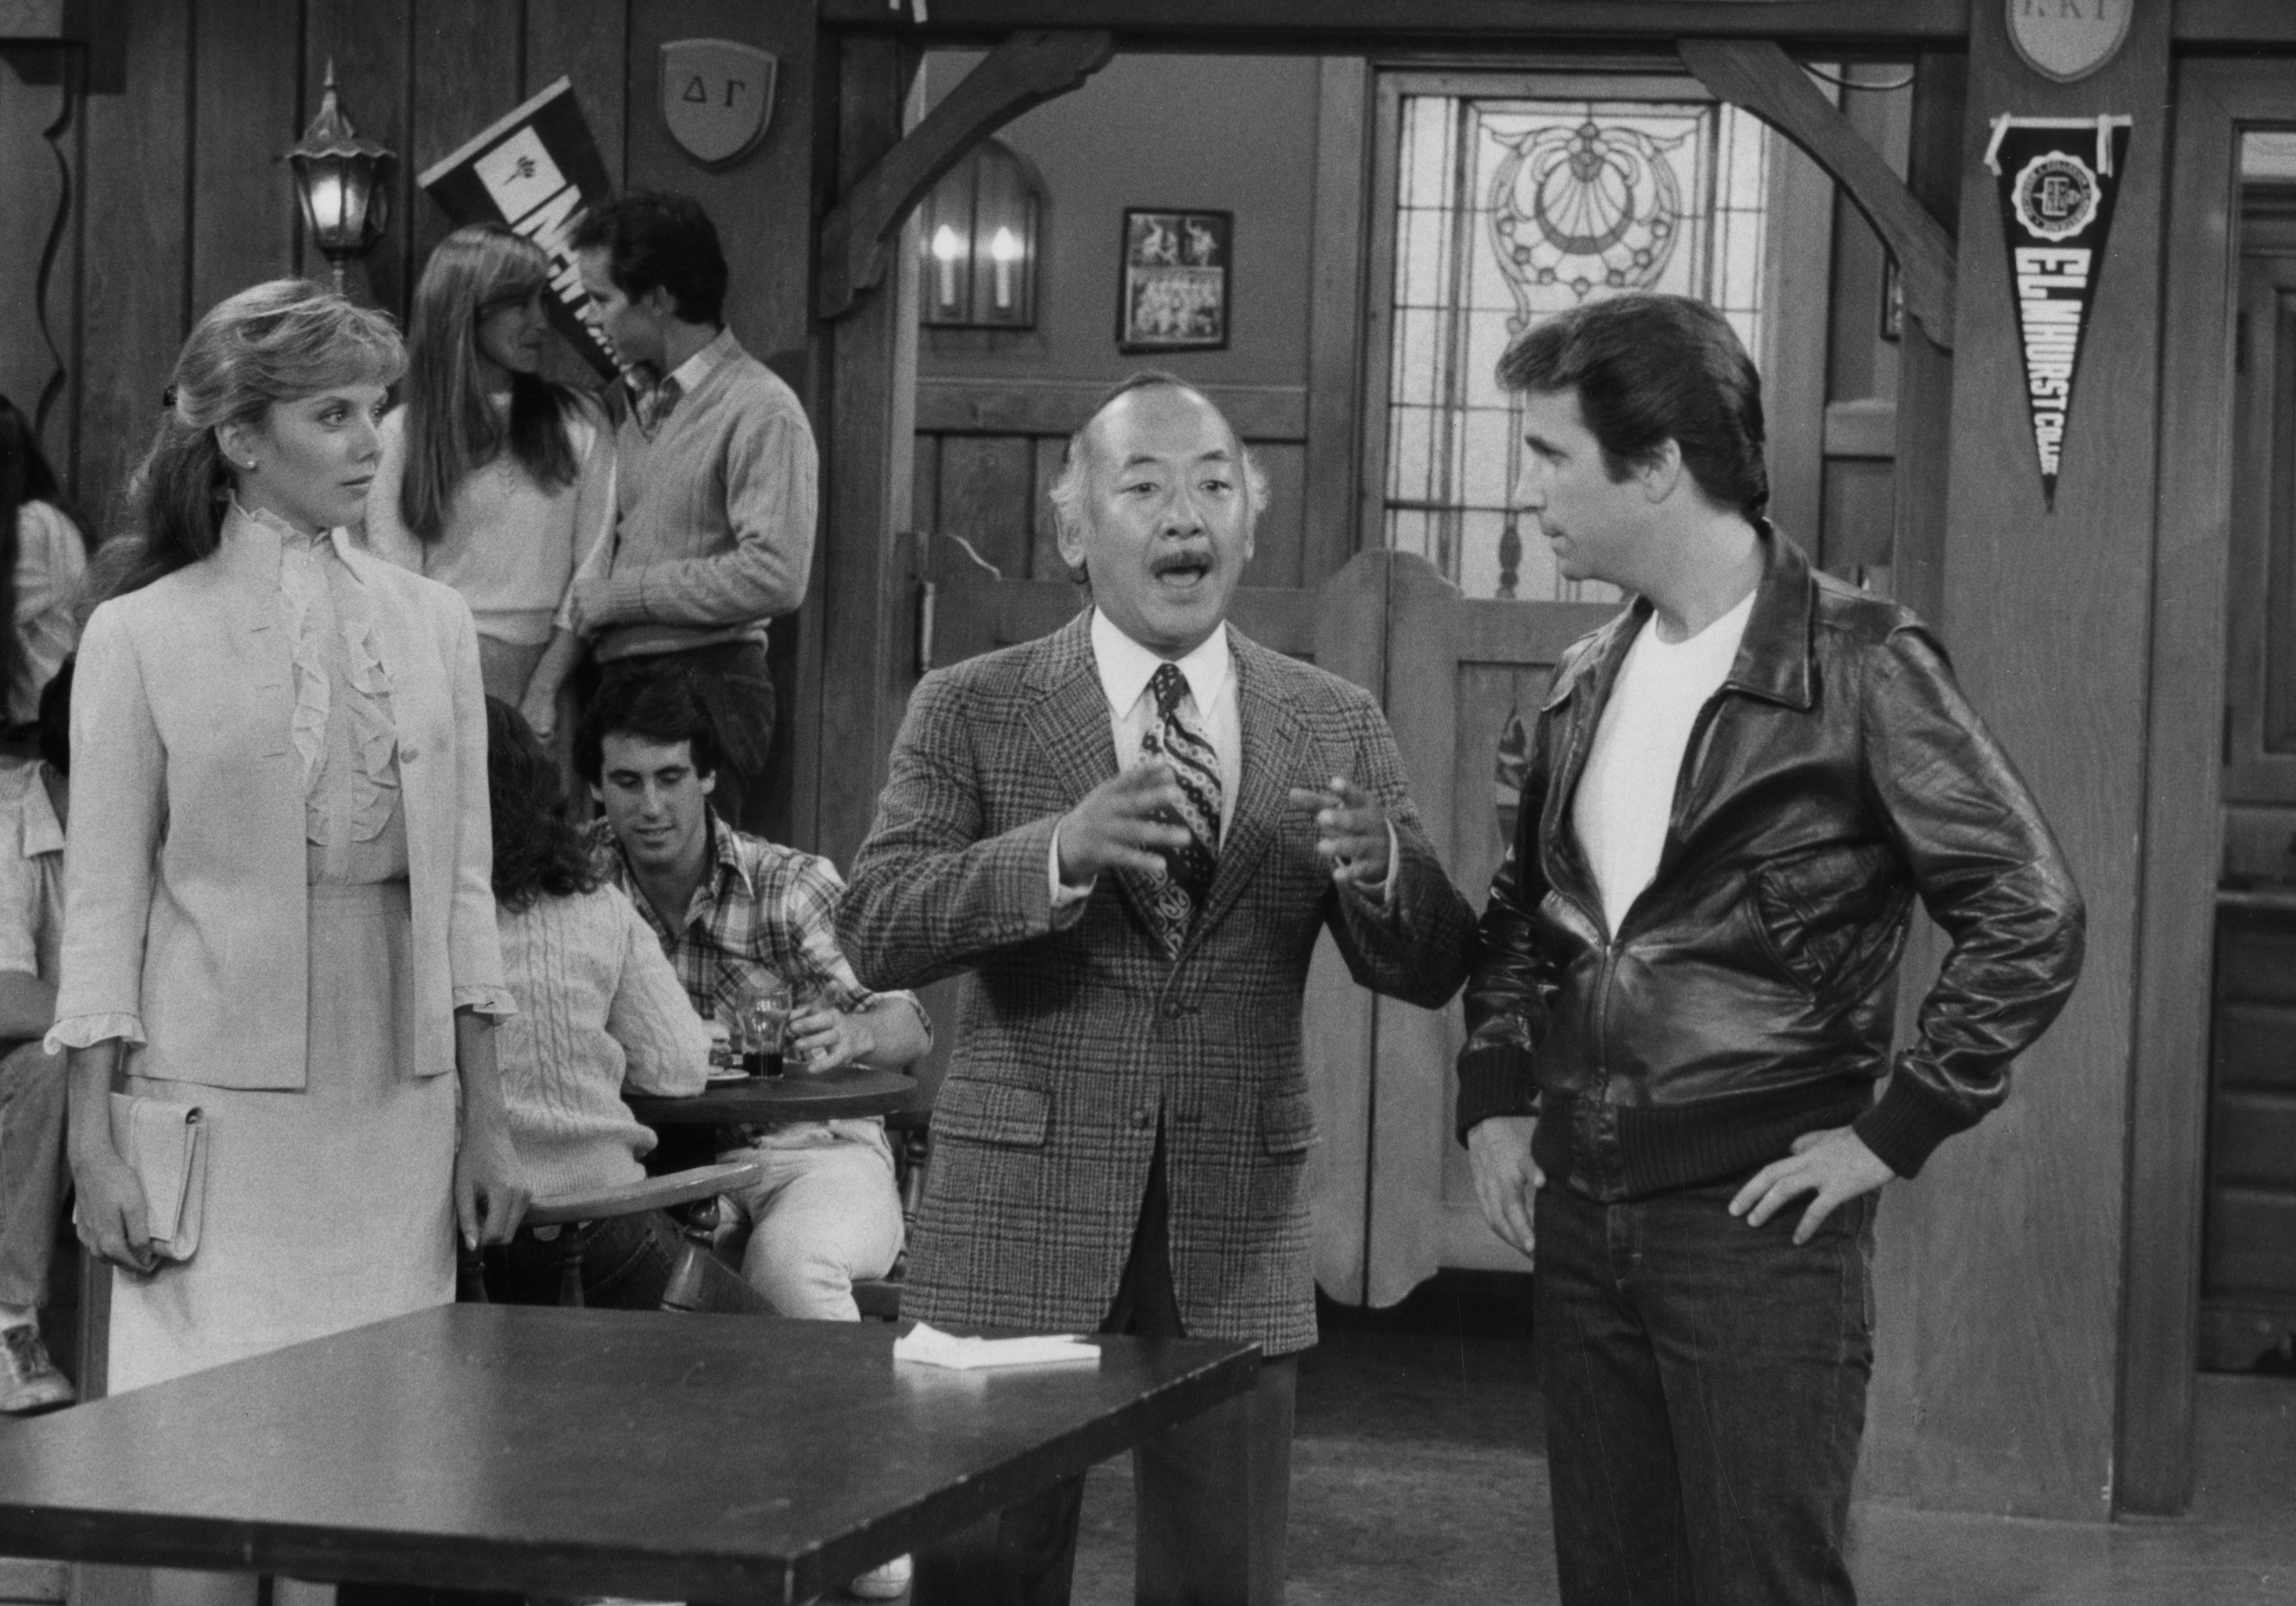 Pat Morita as Matsuo "Arnold" Takahashi in the television sitcom, "Happy Days" on October 19, 1982. / Source: Getty Images